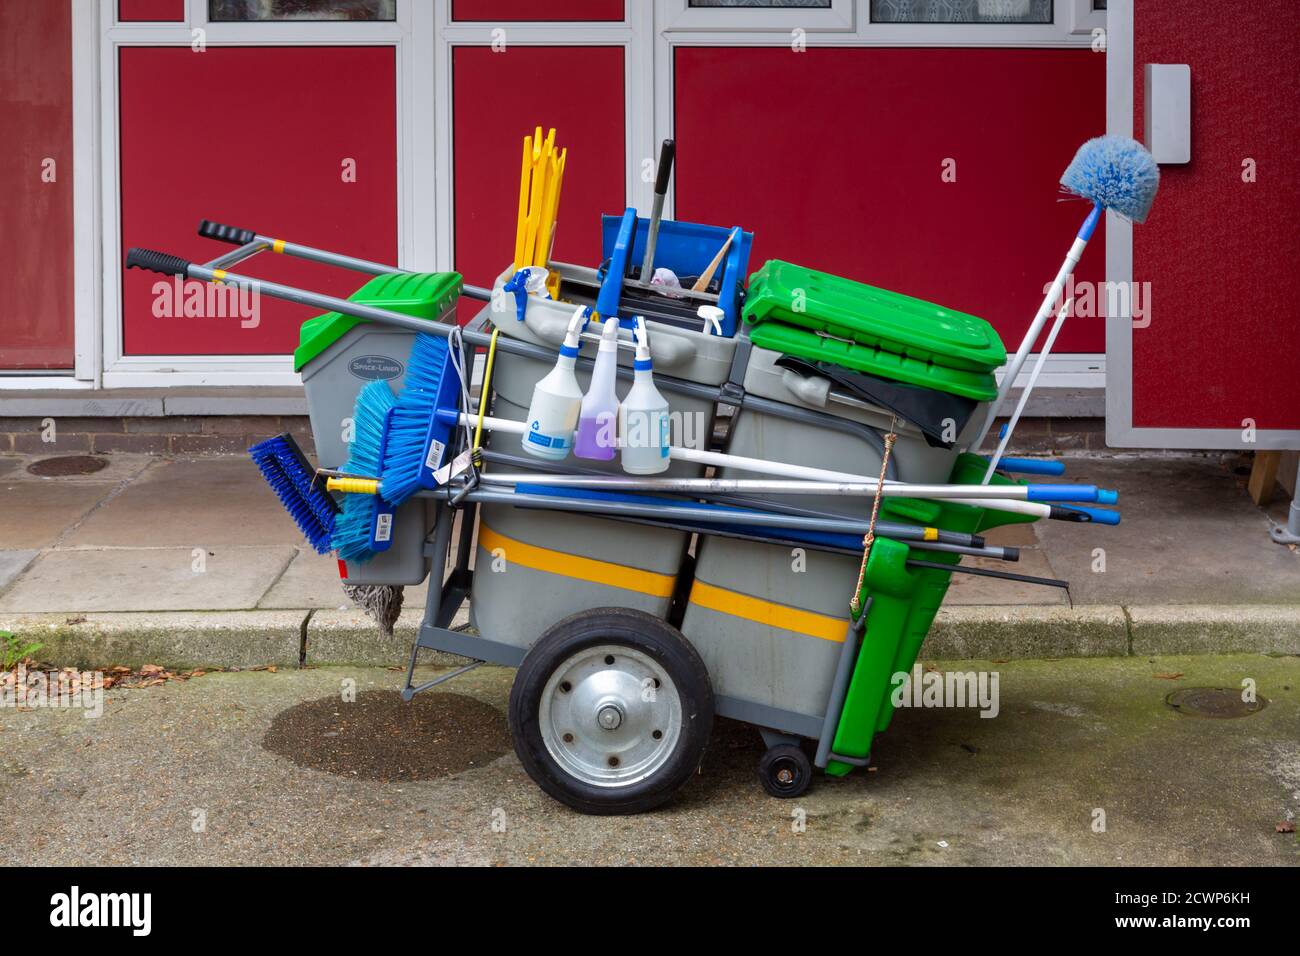 A cleaners trolley with cleaning equipment outside a block of flats Stock Photo